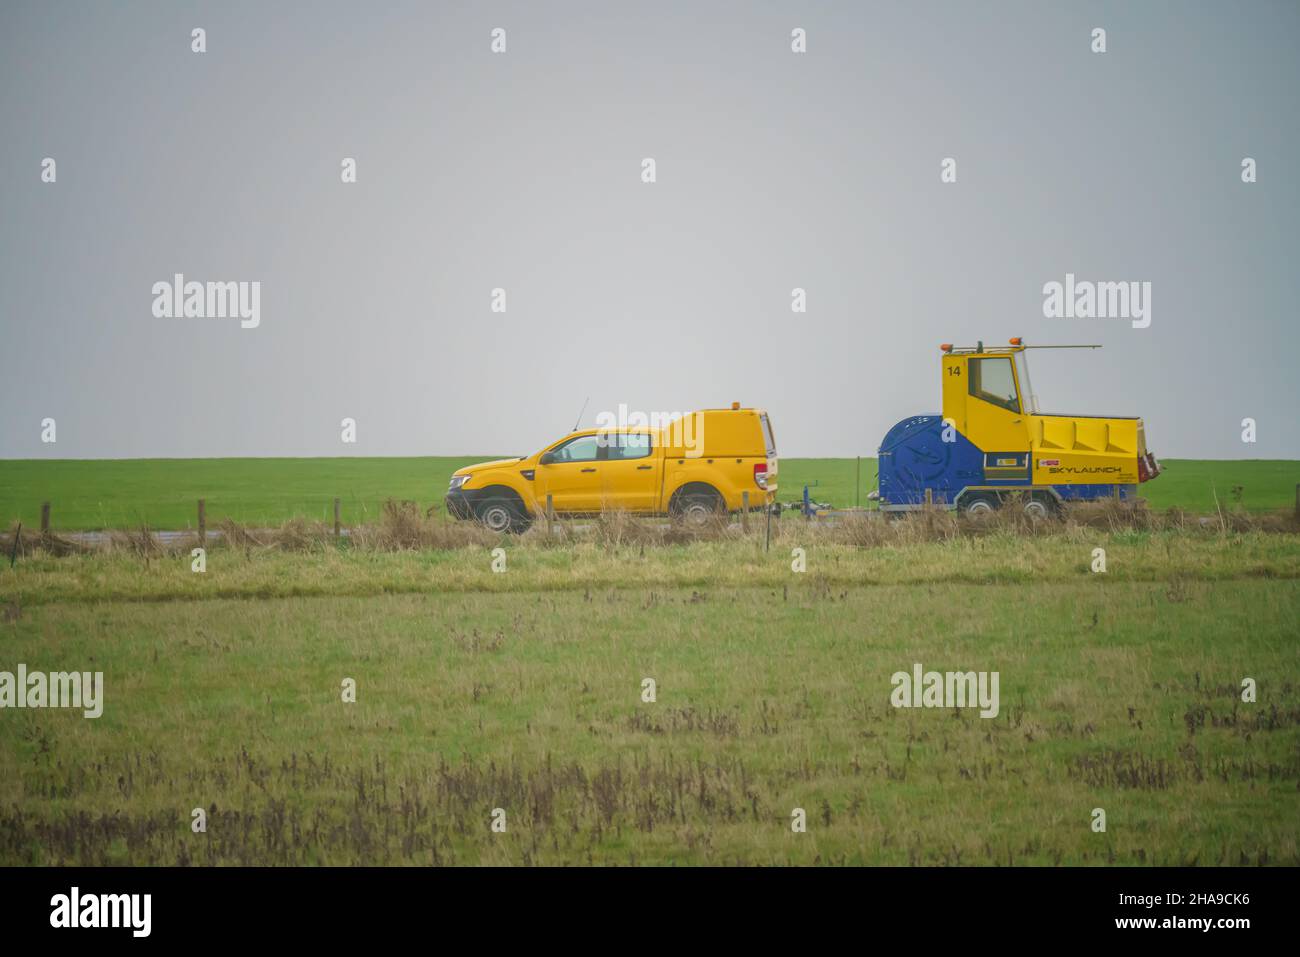 Skylaunch glider high speed cable winch launching system being towed at the end of an airfeld runway, Wiltshire UK Stock Photo